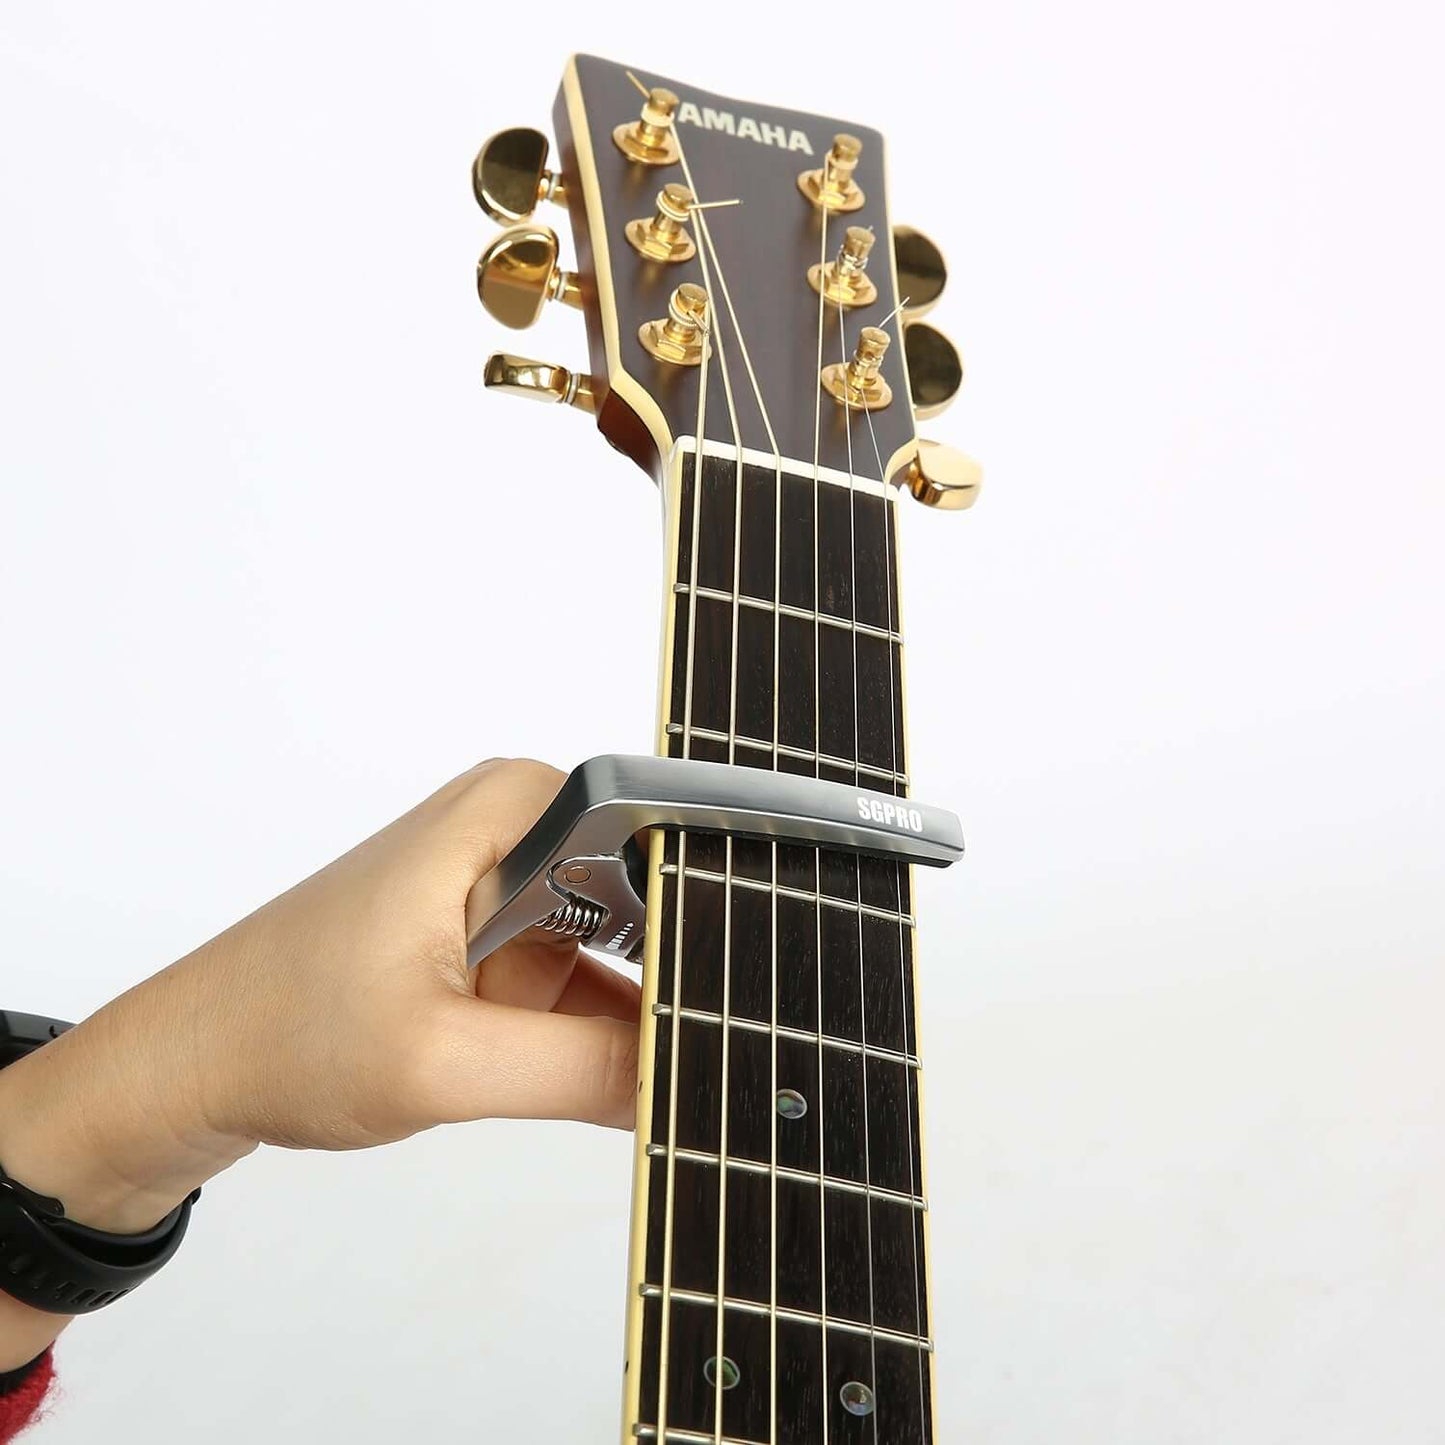 SGPRO Capo for Guitars Acoustic and Electric with Ajustable Spring and Trigger Tension, Handy String Pin Puller and Fashionable Hard Zinc Alloy Design